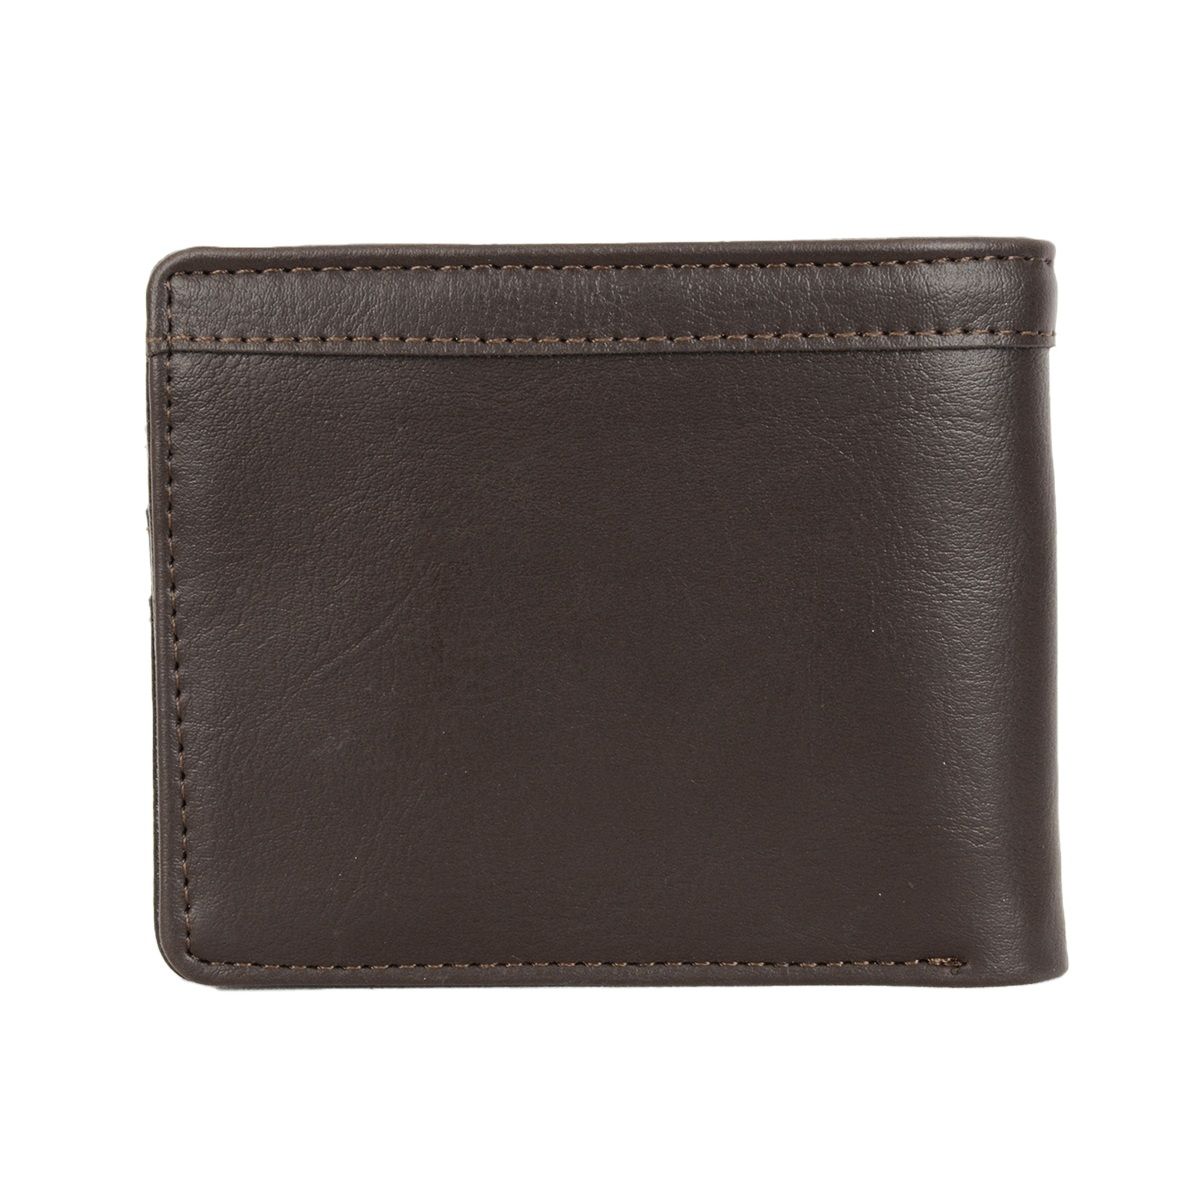 Embossed Leather Designer Baggit Wallet For Women For Men And Women With  Zipper, Coin Checker, And Box Long And Short Options Available From  Yclmghd, $8.63 | DHgate.Com